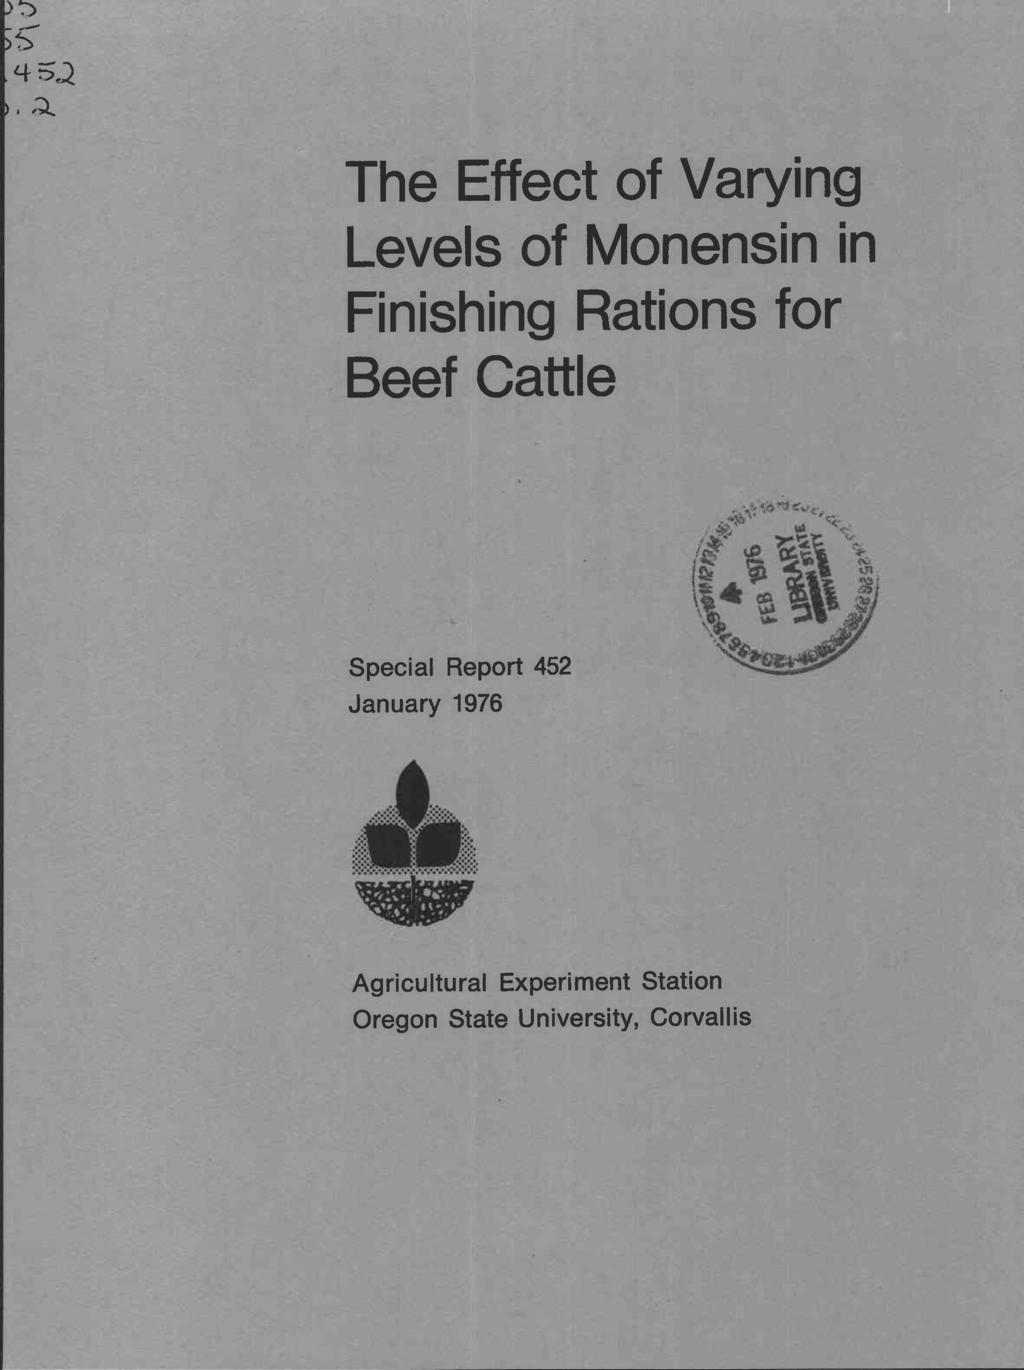 The Effect of Varying Levels of Monensin in Finishing Rations for Beef Cattle Special